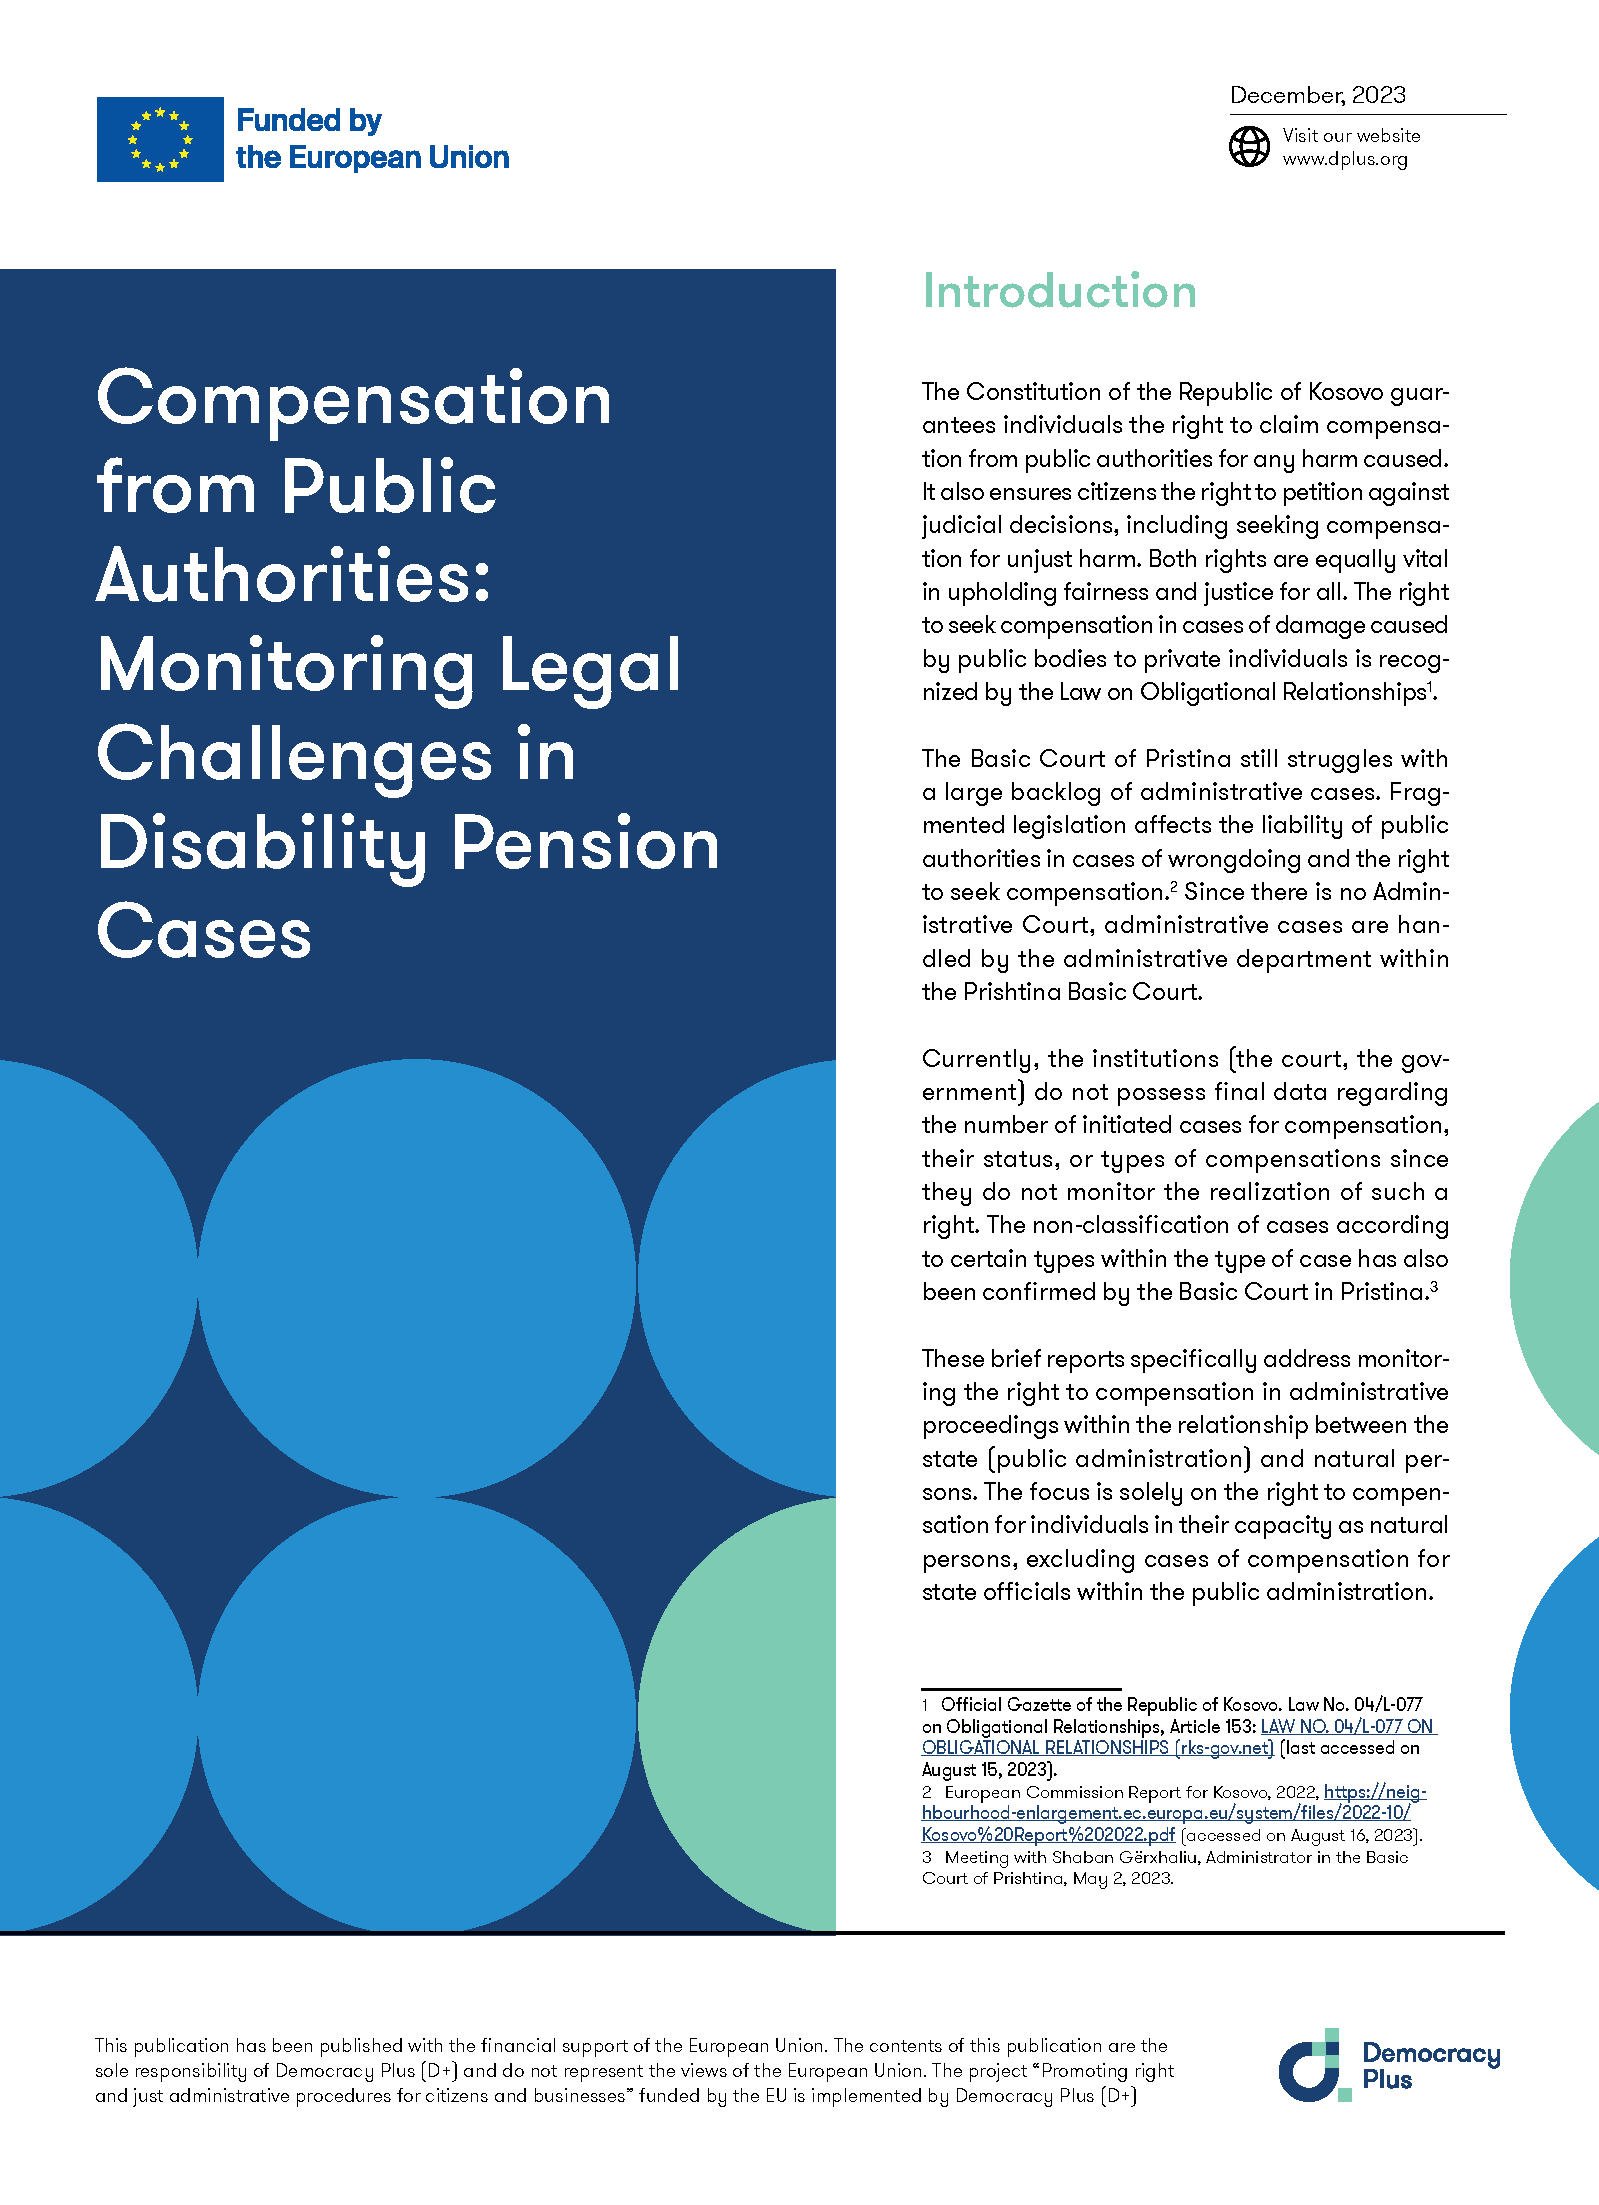 Compensation from Public Authorities: Monitoring Legal Challenges in Disability Pension Cases